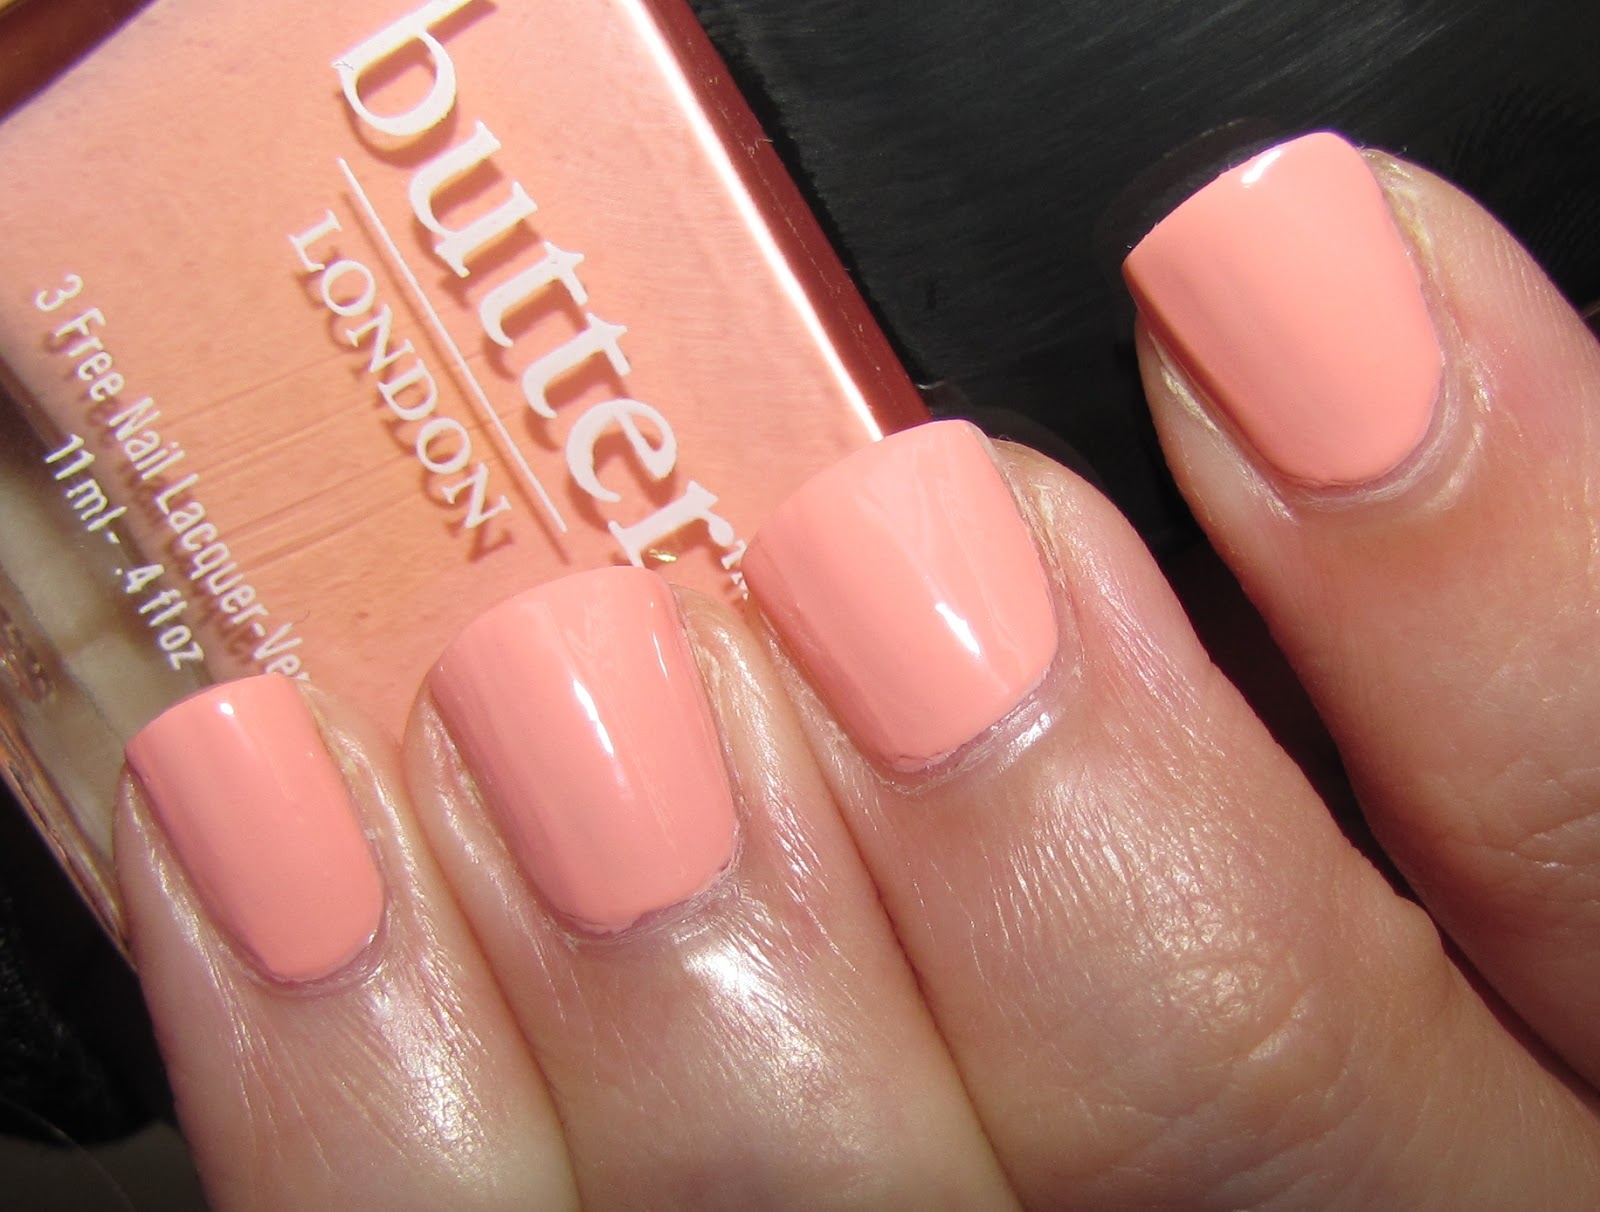 7. Butter London Nail Lacquer in "Fiver" - wide 3